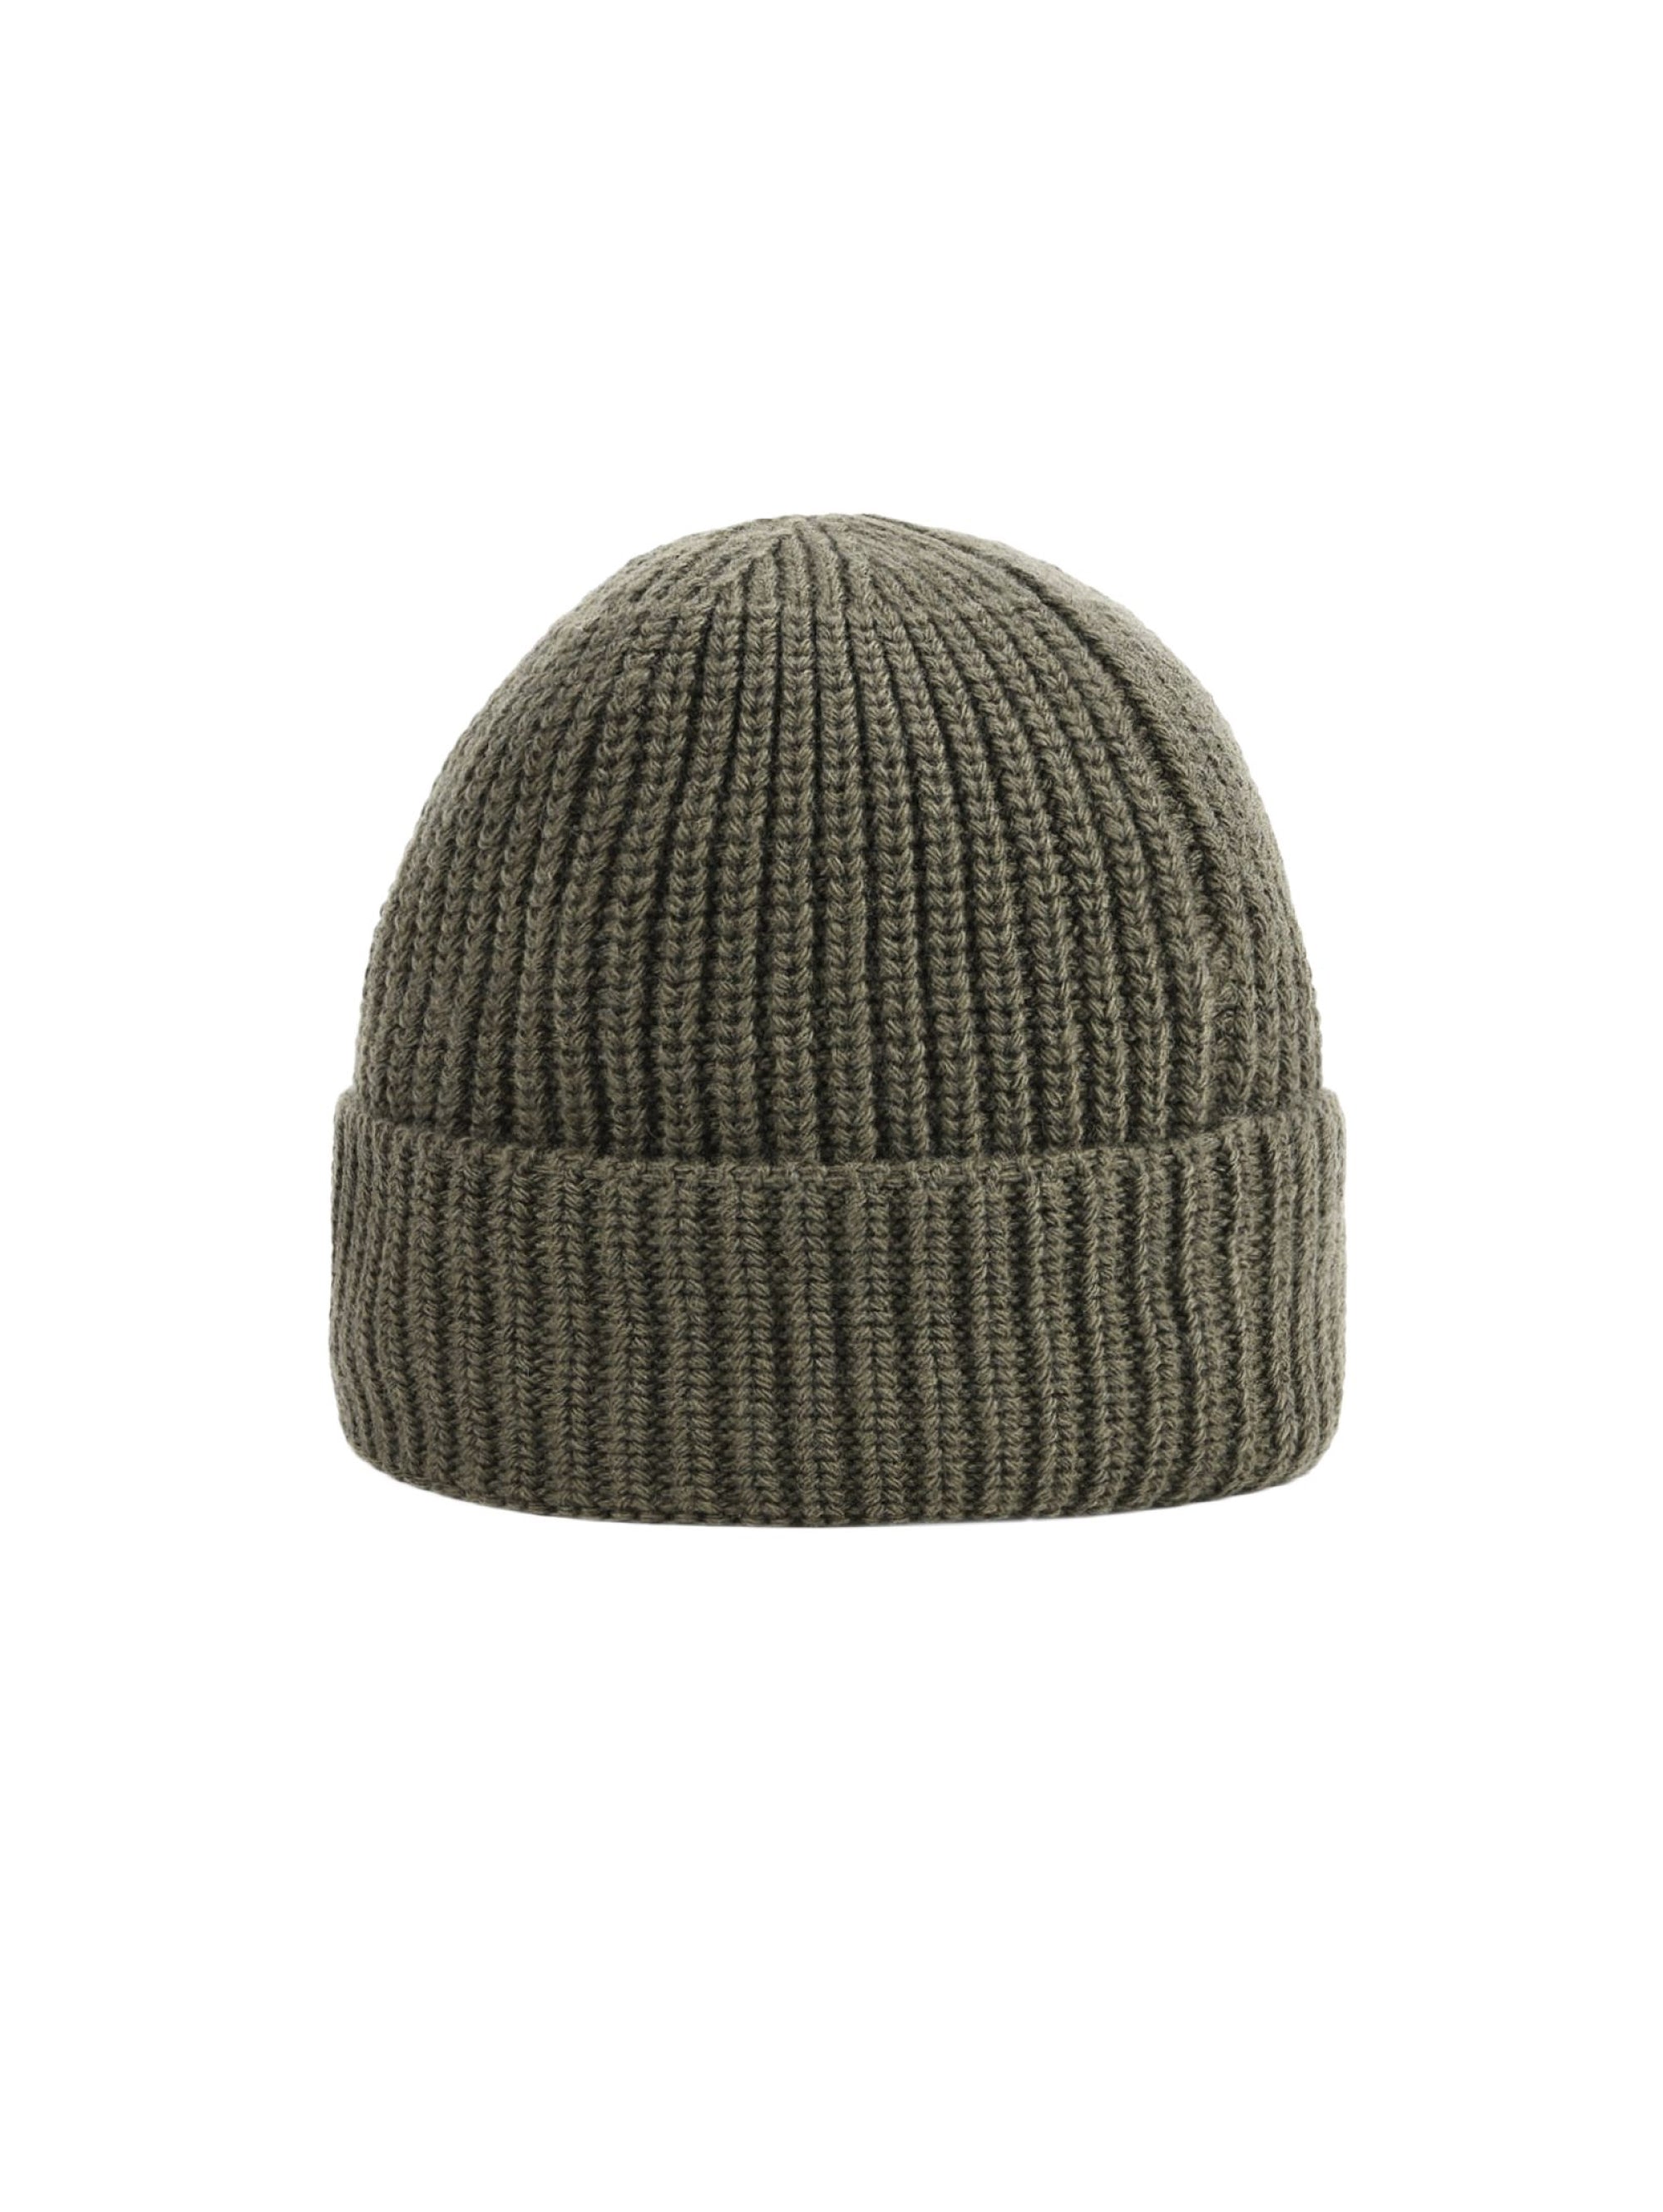 Olive Ribbed Geelong Wool Beanie